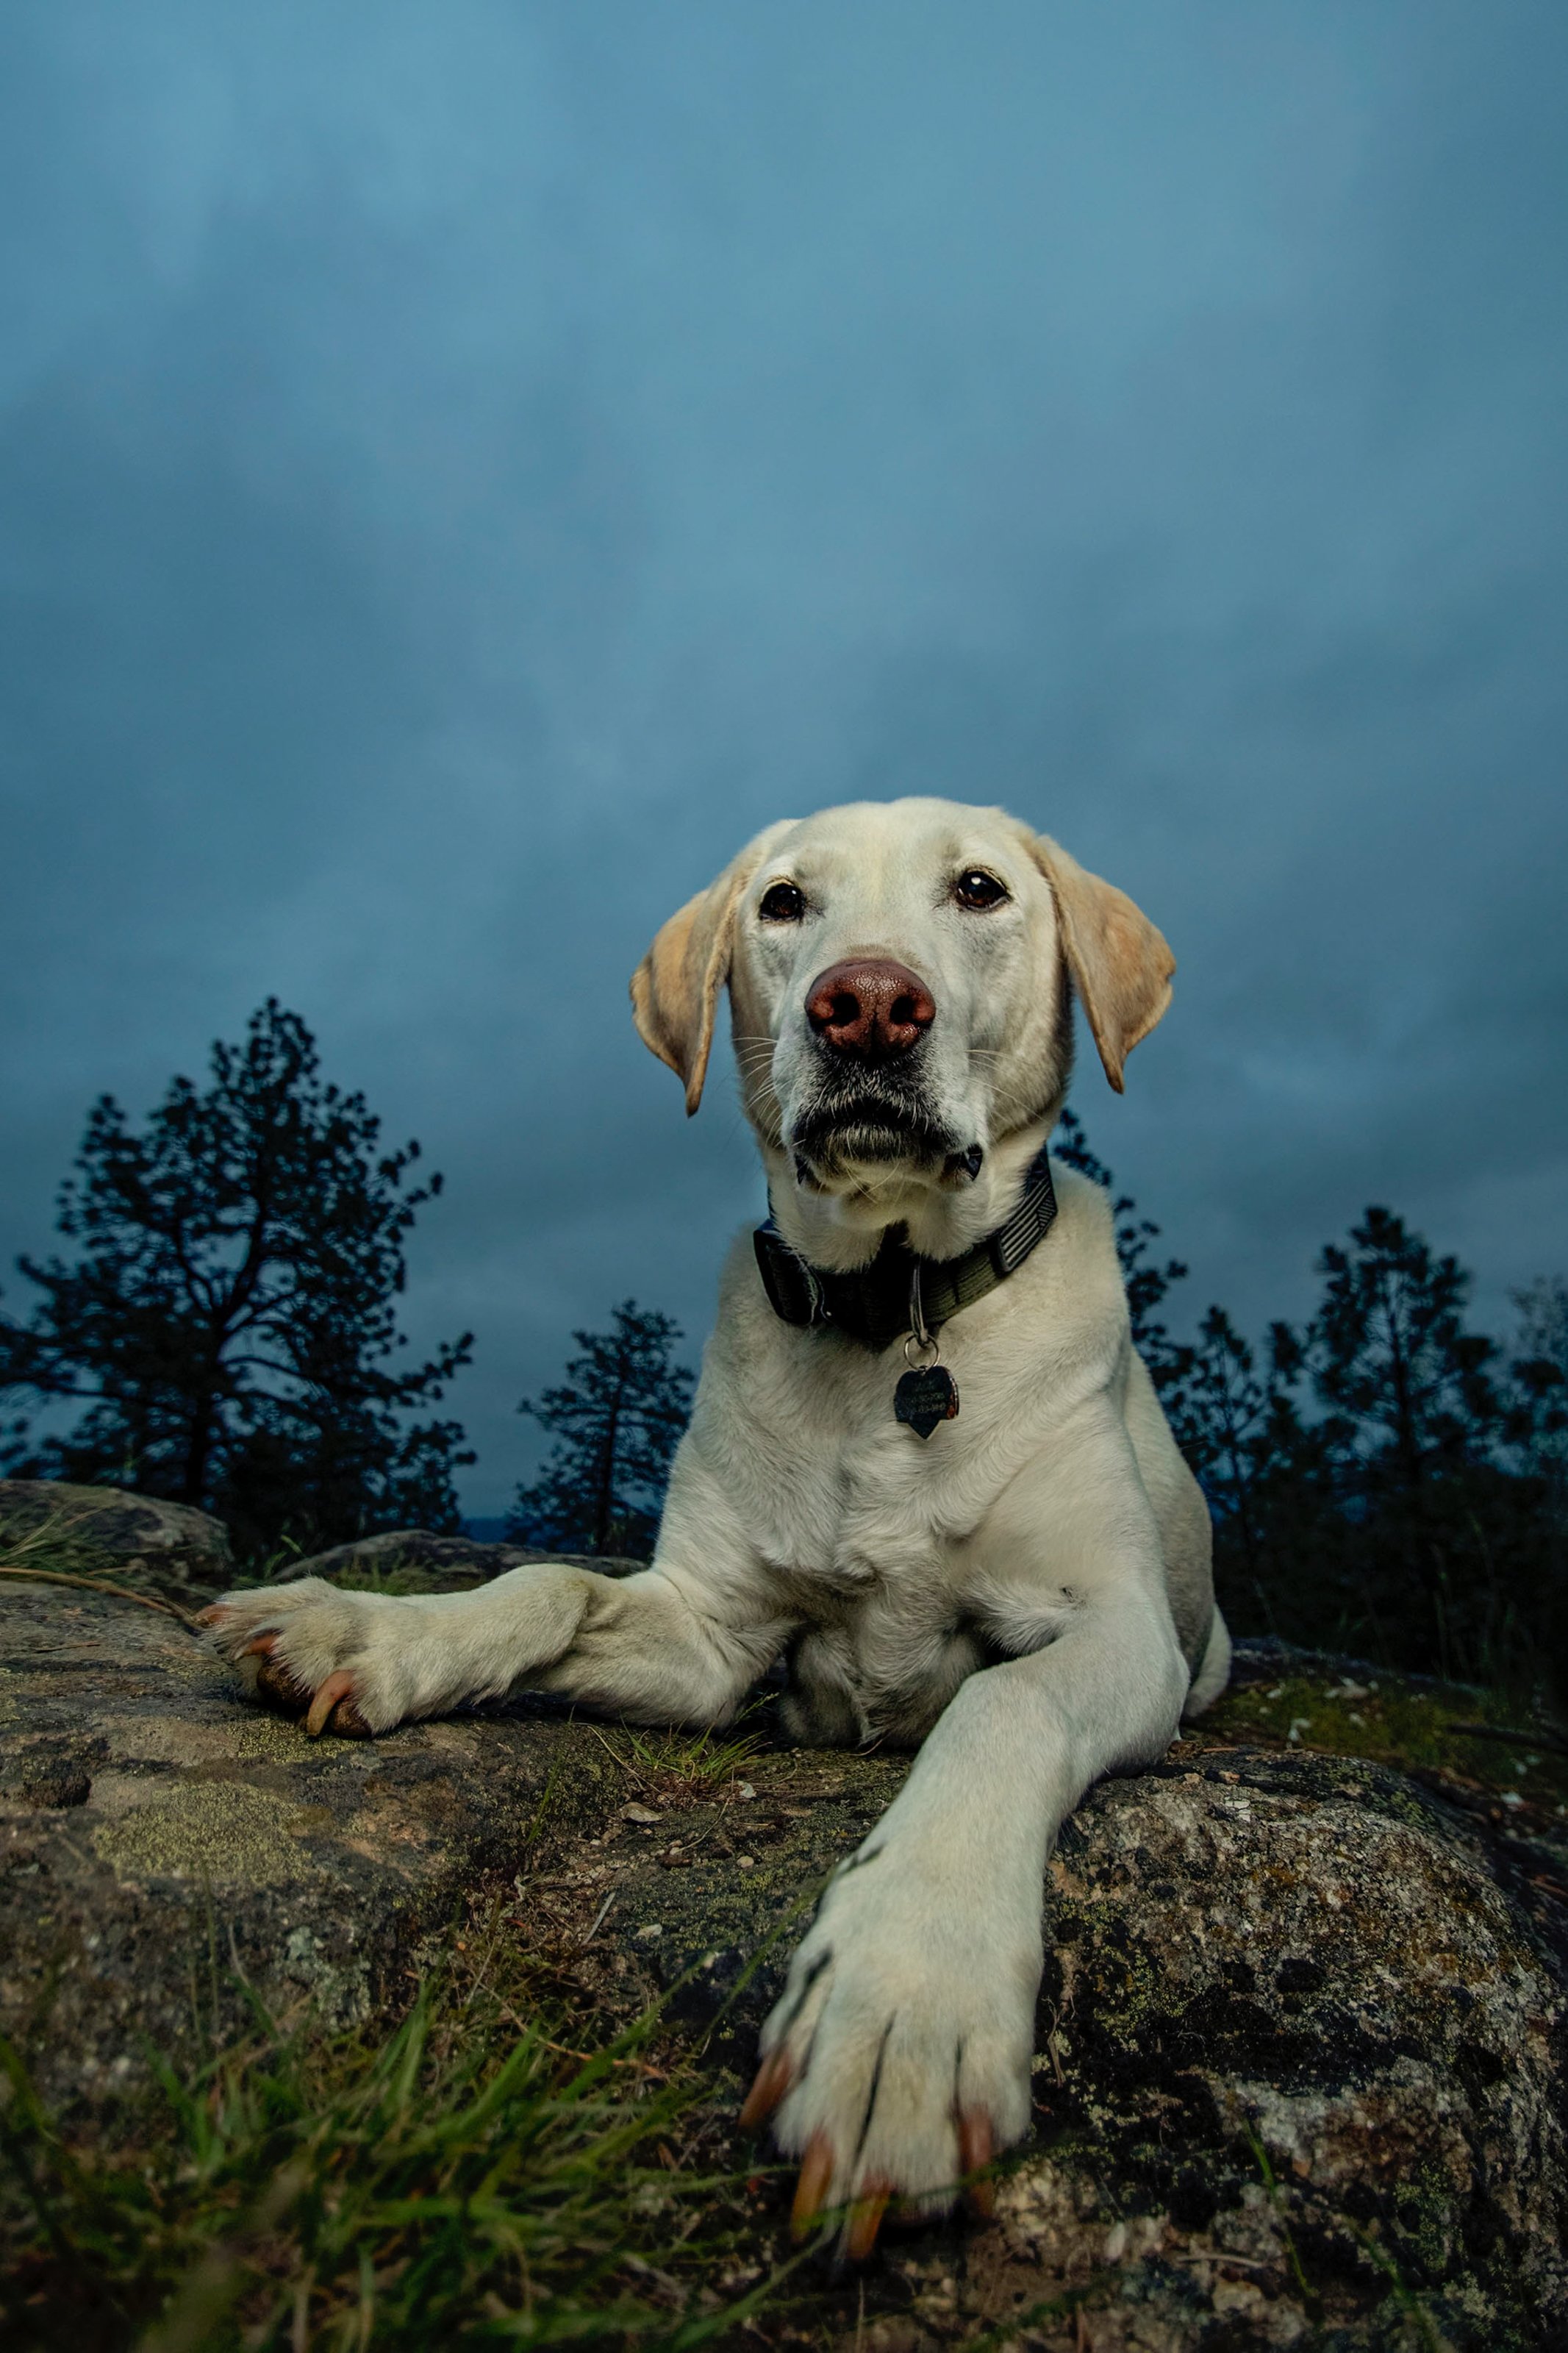 Jack the Labrador, at Dishman Hills Conservation Area in Spokane Valley